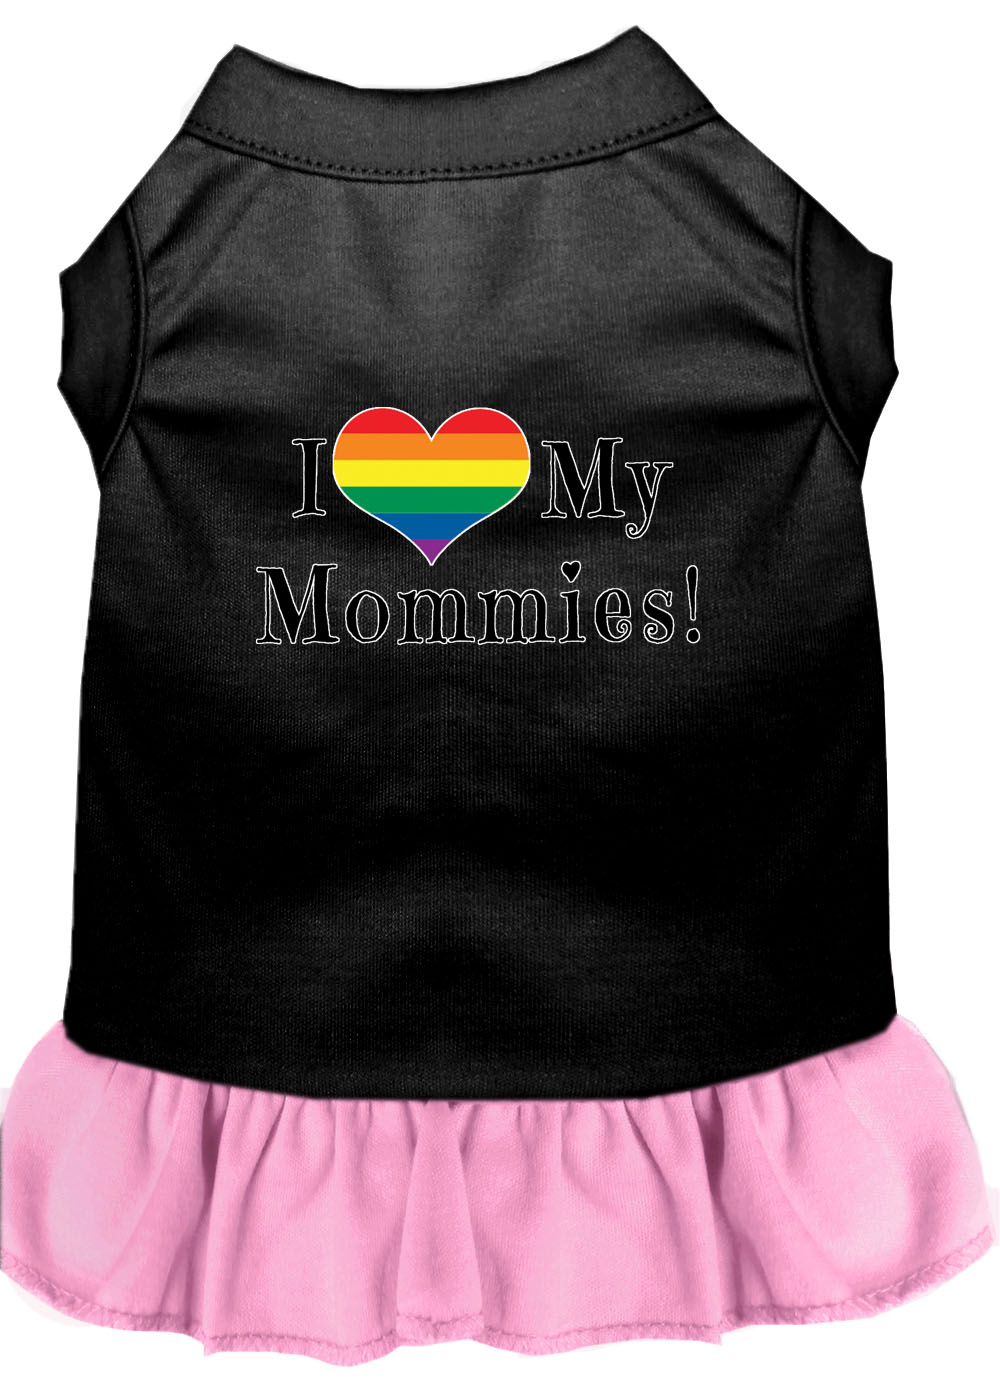 I Heart my Mommies Screen Print Dog Dress Black with Light Pink Sm